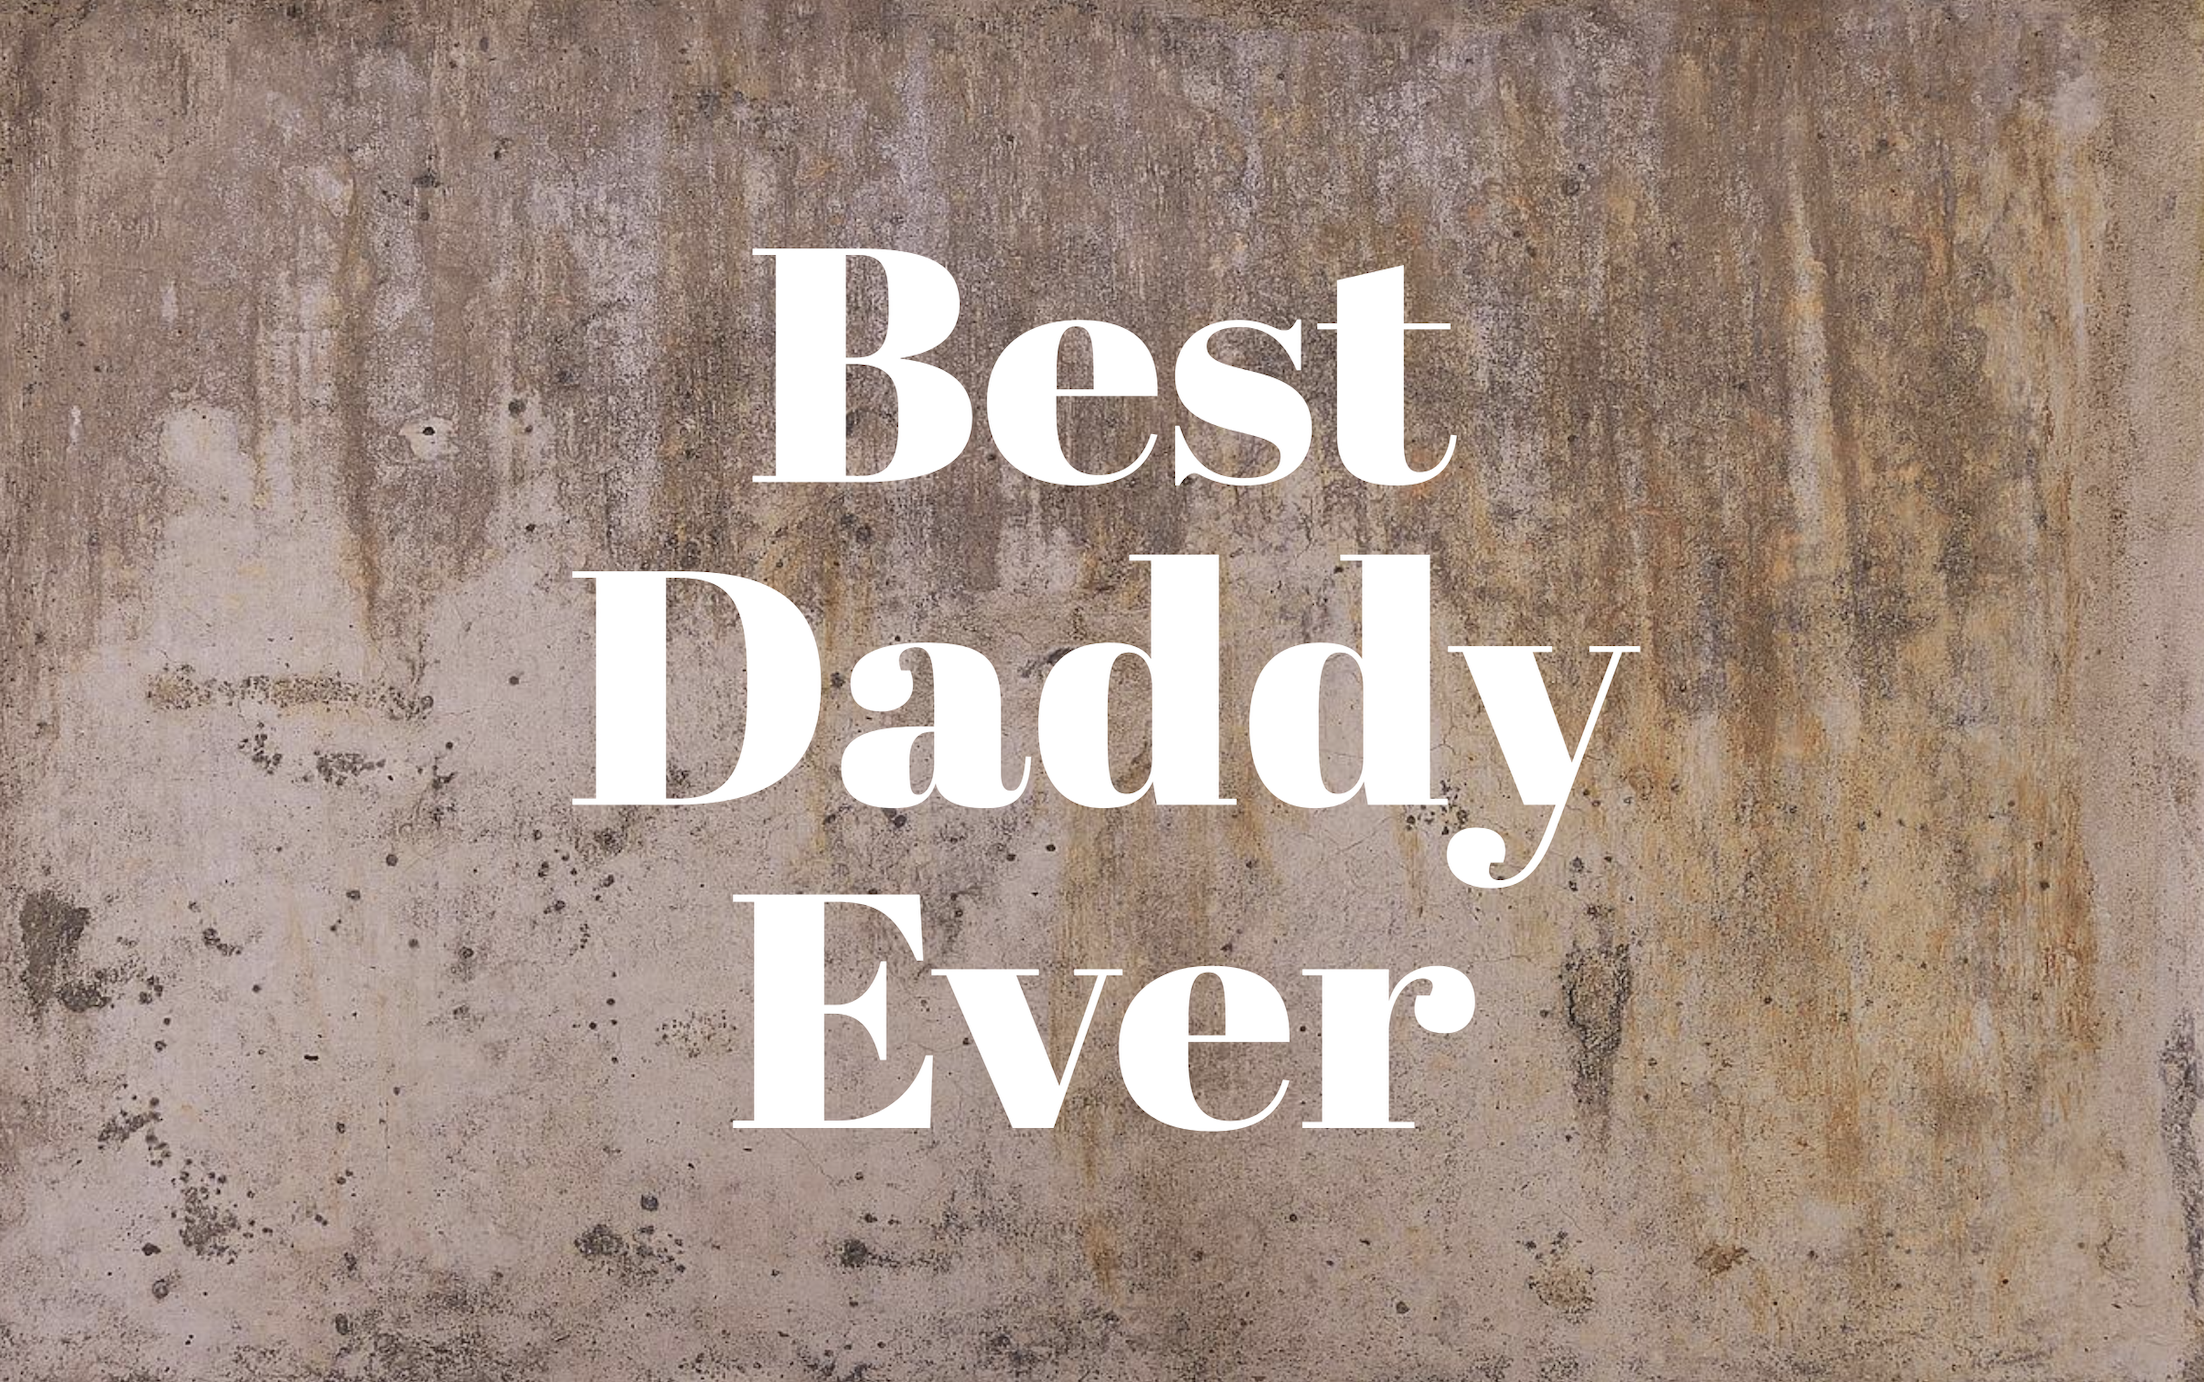 Best Daddy Ever Decal - Holiday Father/Dad/Dada/Daddy Vinyl Decals for Home, Gifts, Businesses and More!